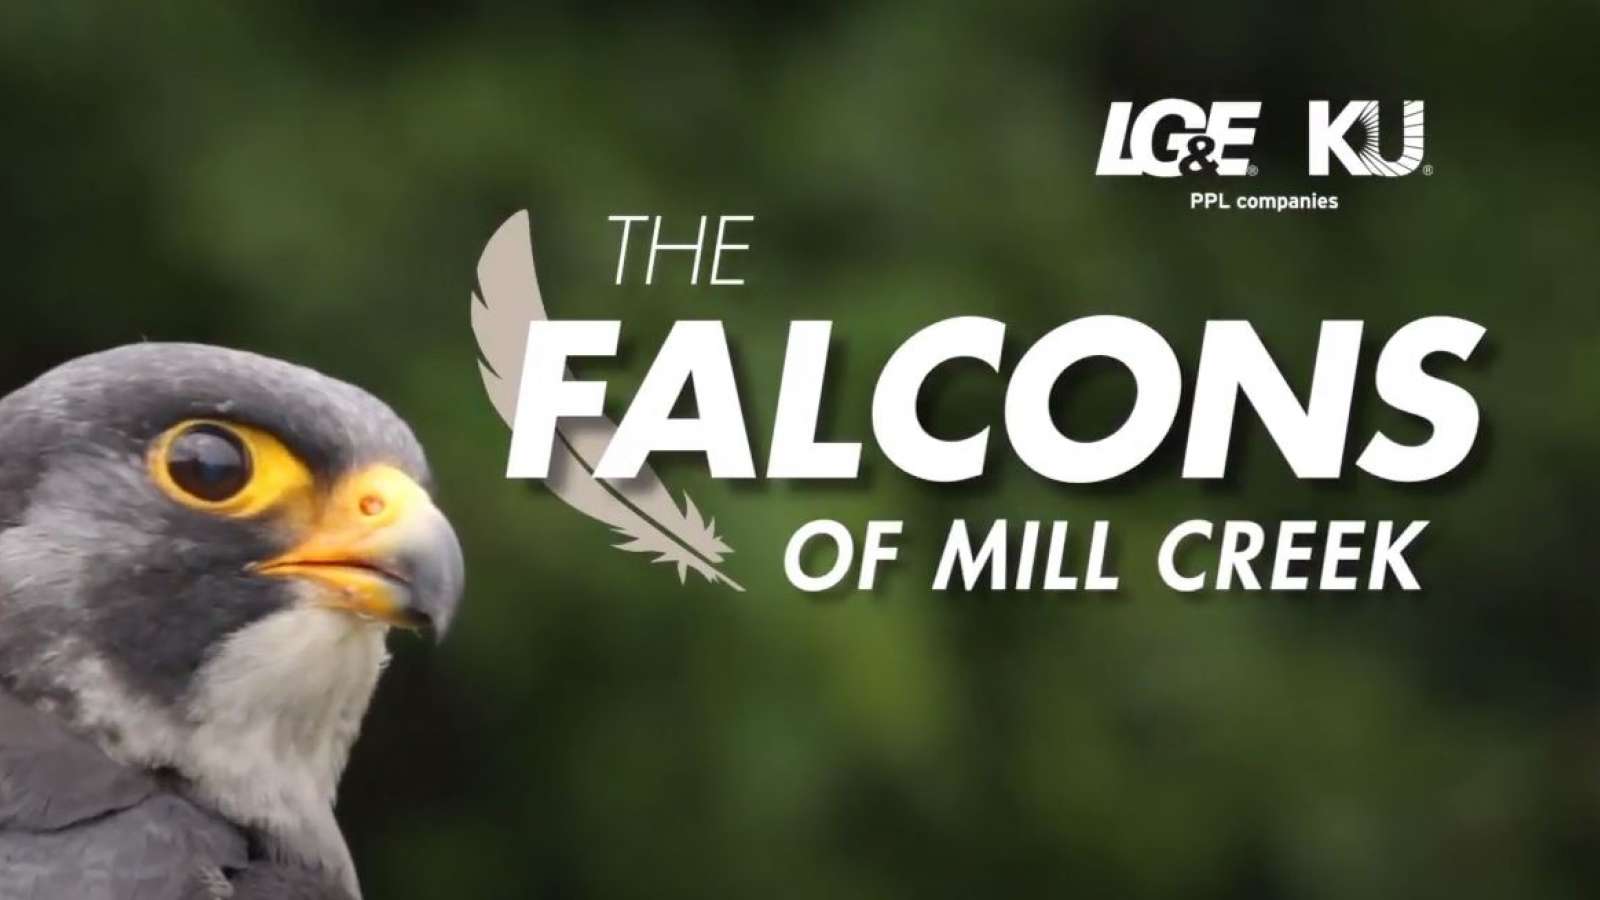 peregrine falcon with title "The Falcons of Mill Creek" next to it